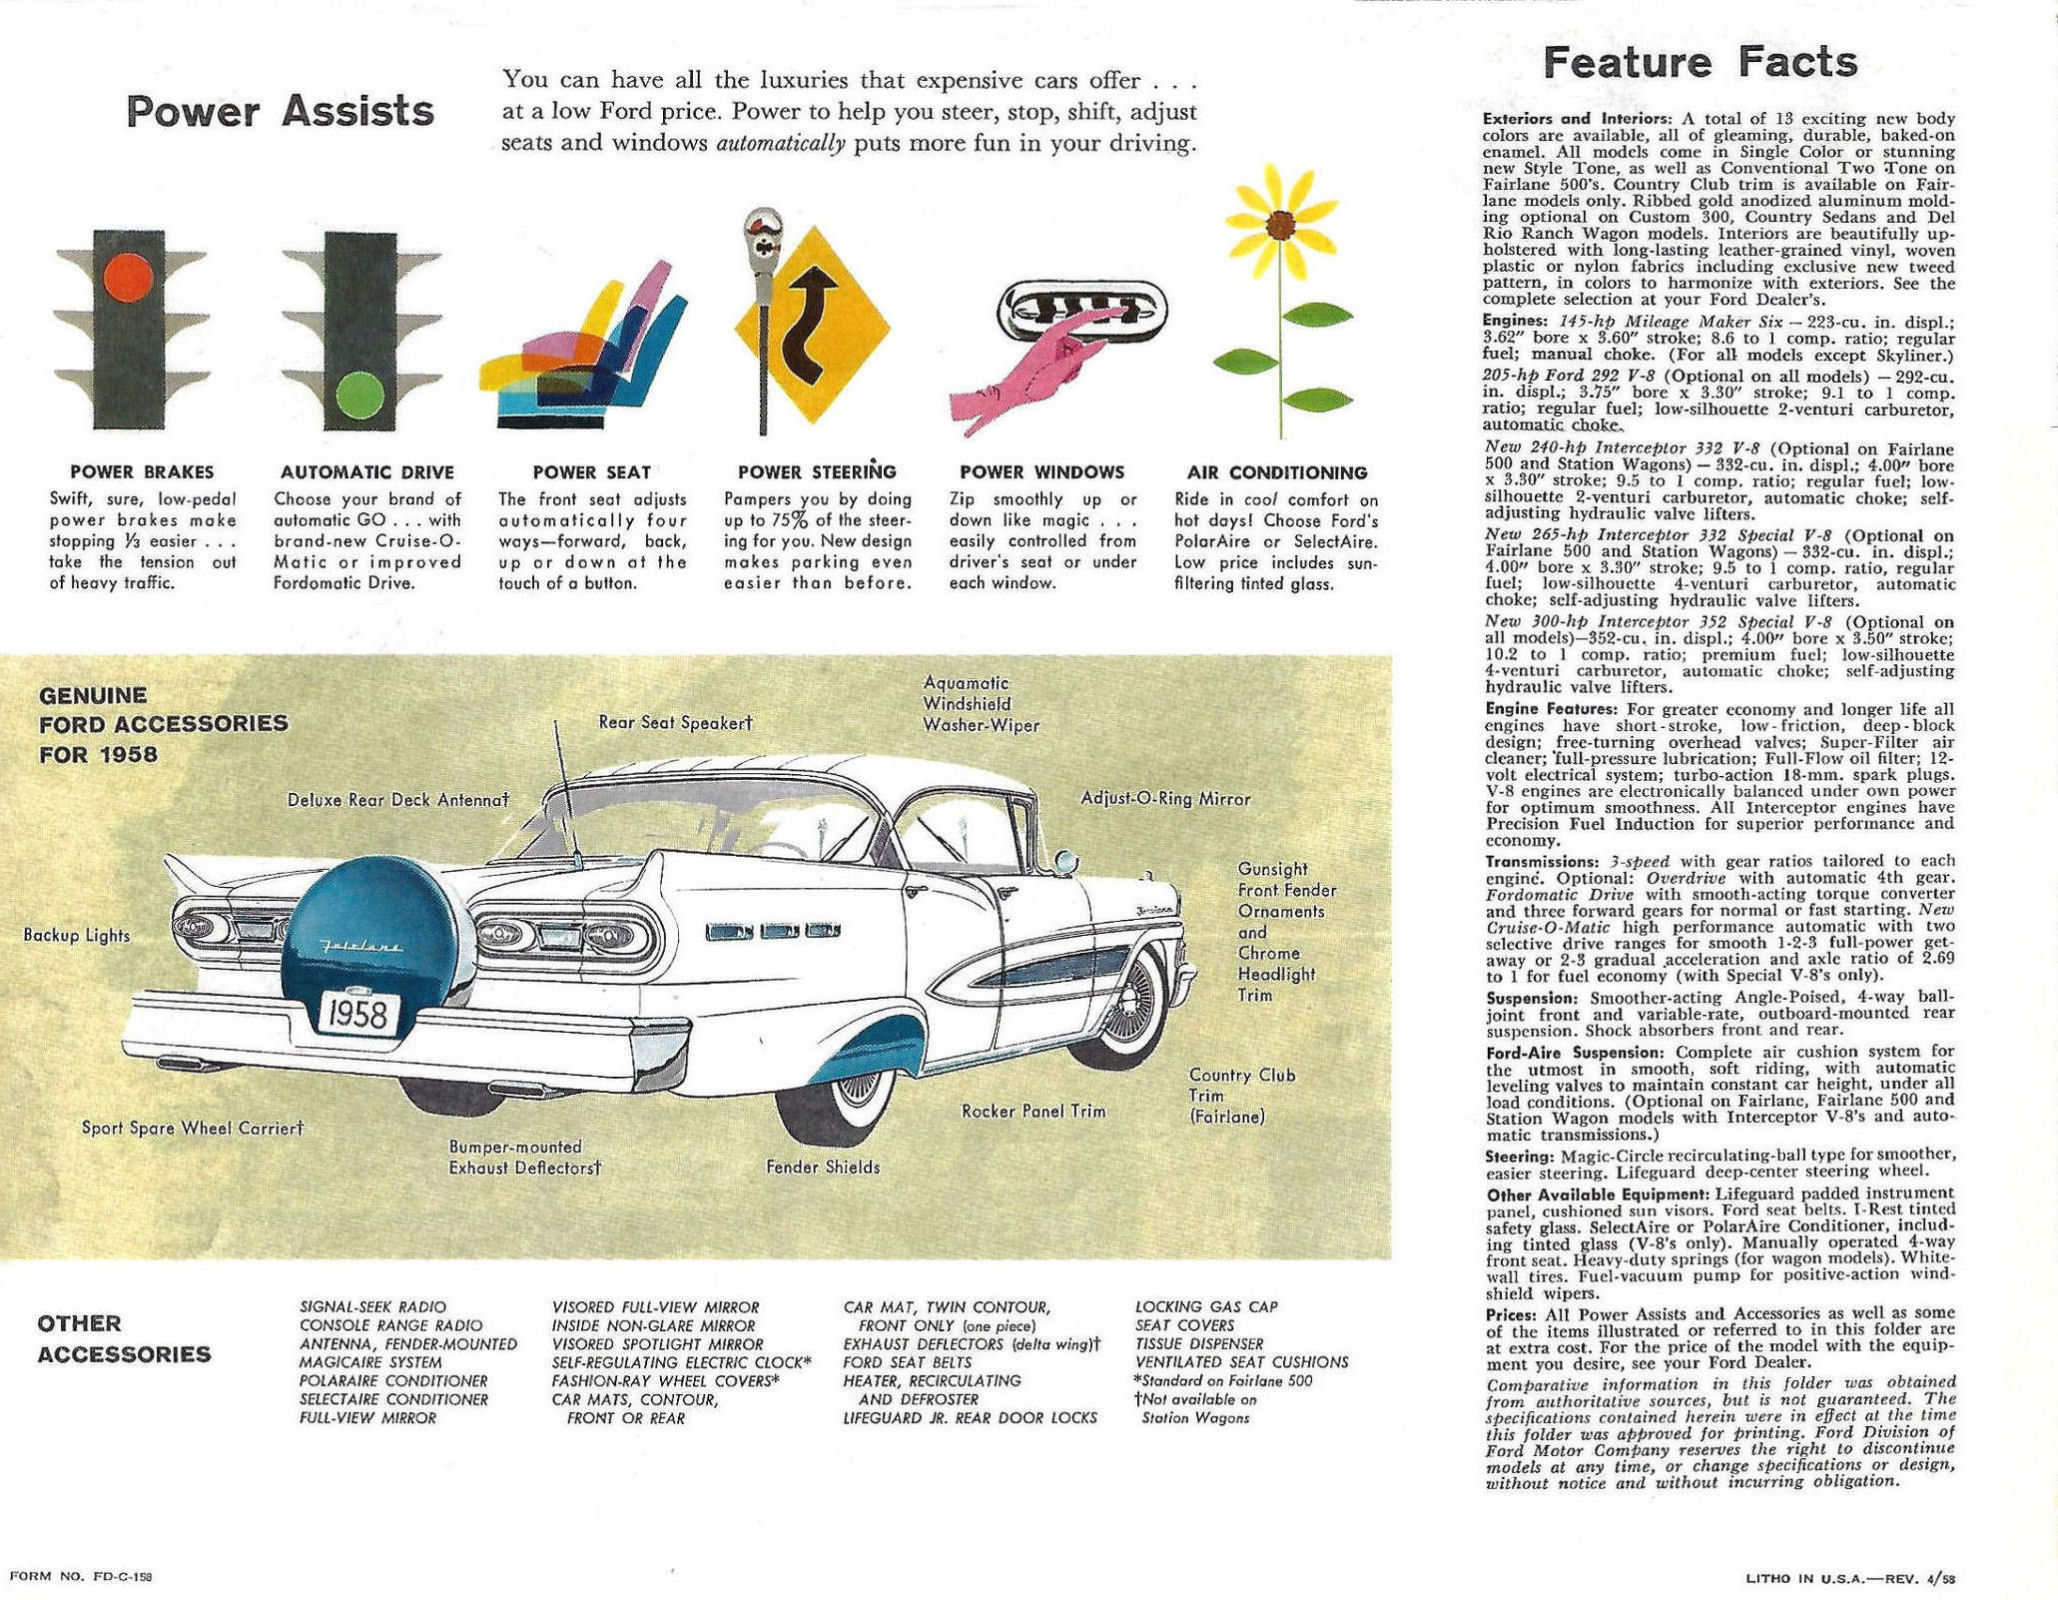 1958 Ford Full Line Foldout (4-58) (TP).pdf-2024-1-4 10.6.11_Page_3